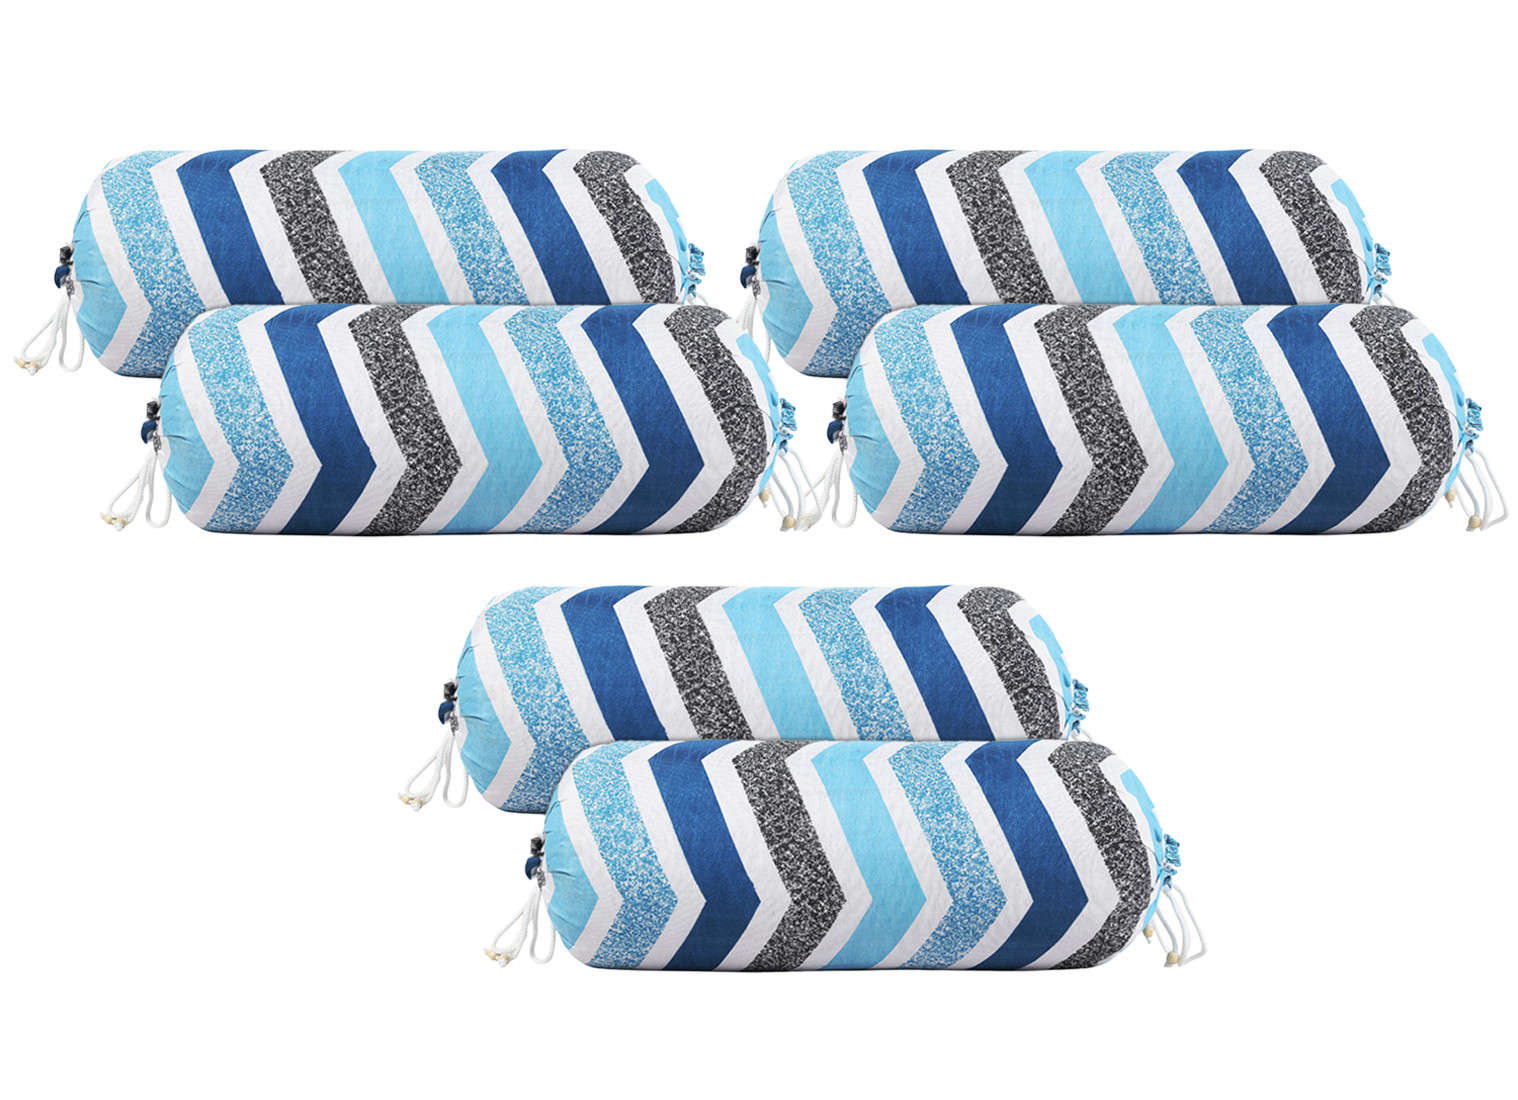 Kuber Industries Bolster Cover|Soft Cotton Bolster Cover Set|Diwan Round Bolster Pillow Covers|Luxurious Zig Zag Print Roll Masand Cover|16x32 Inch(Multi)